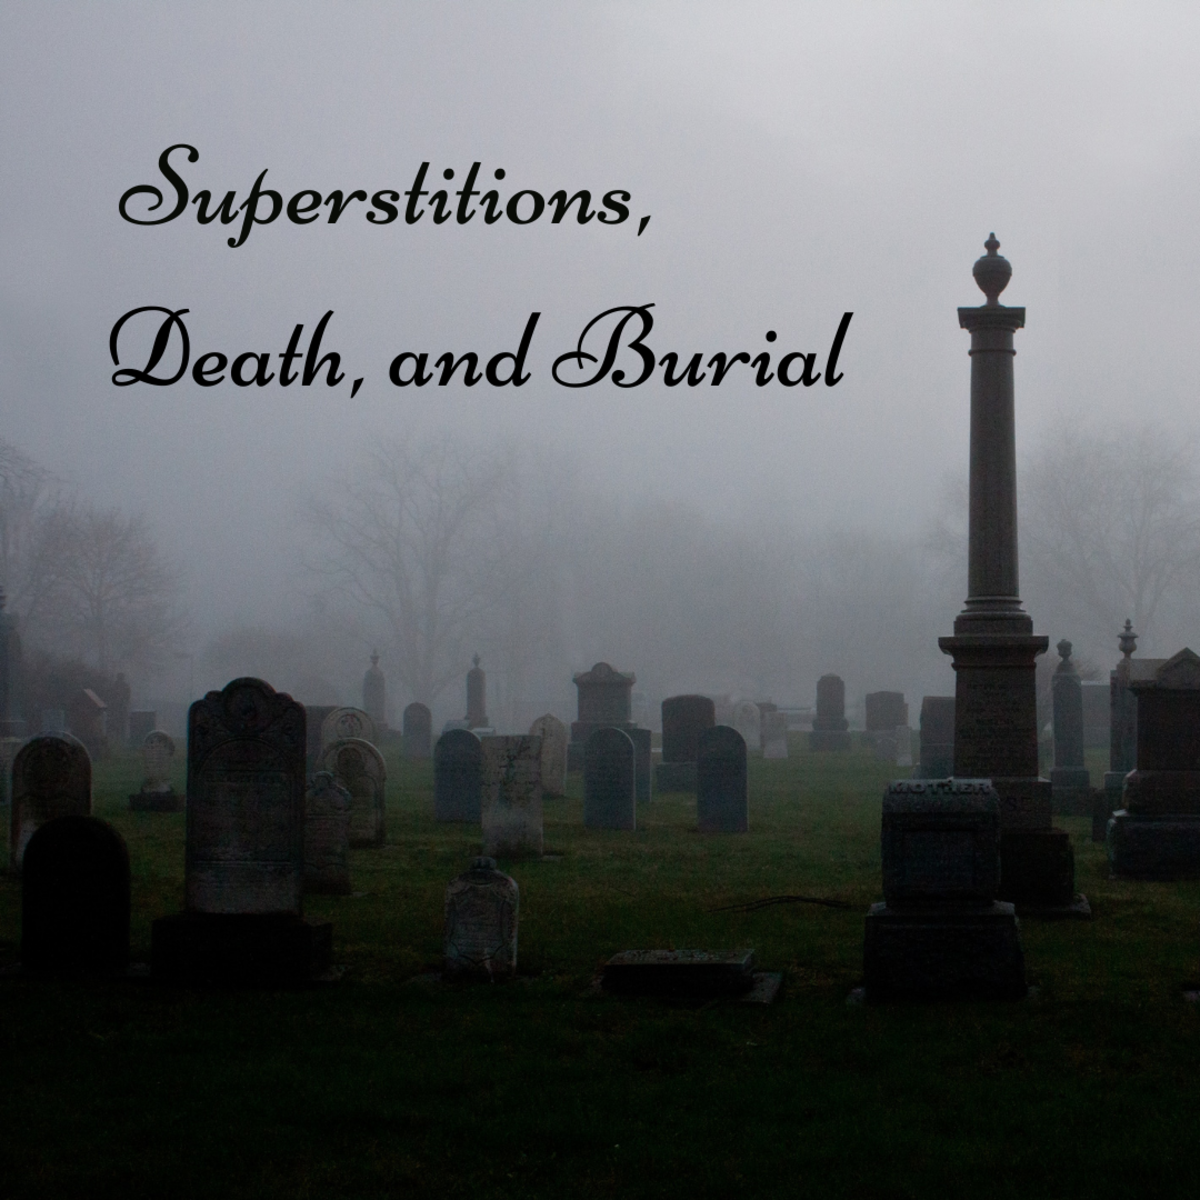 7 Superstitions About Funerals and Cemeteries